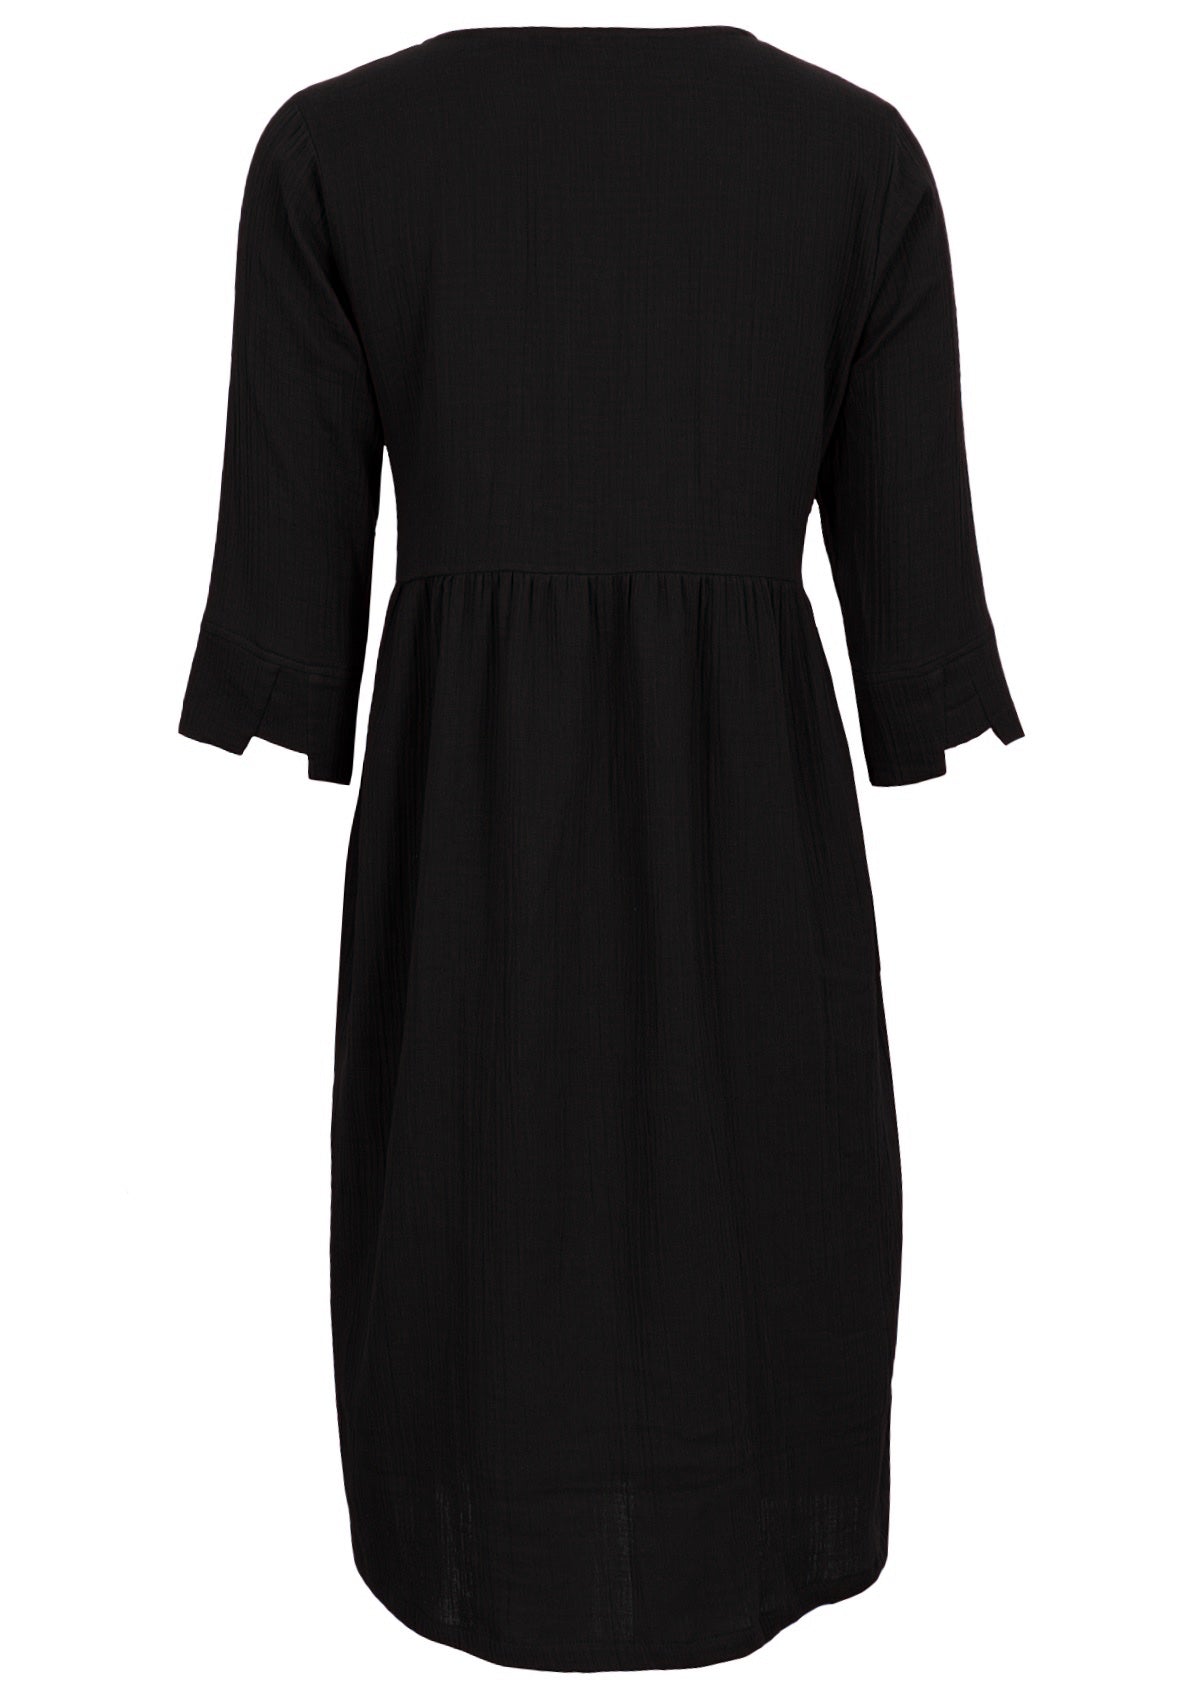 Black double cotton dress with detailed cuffs